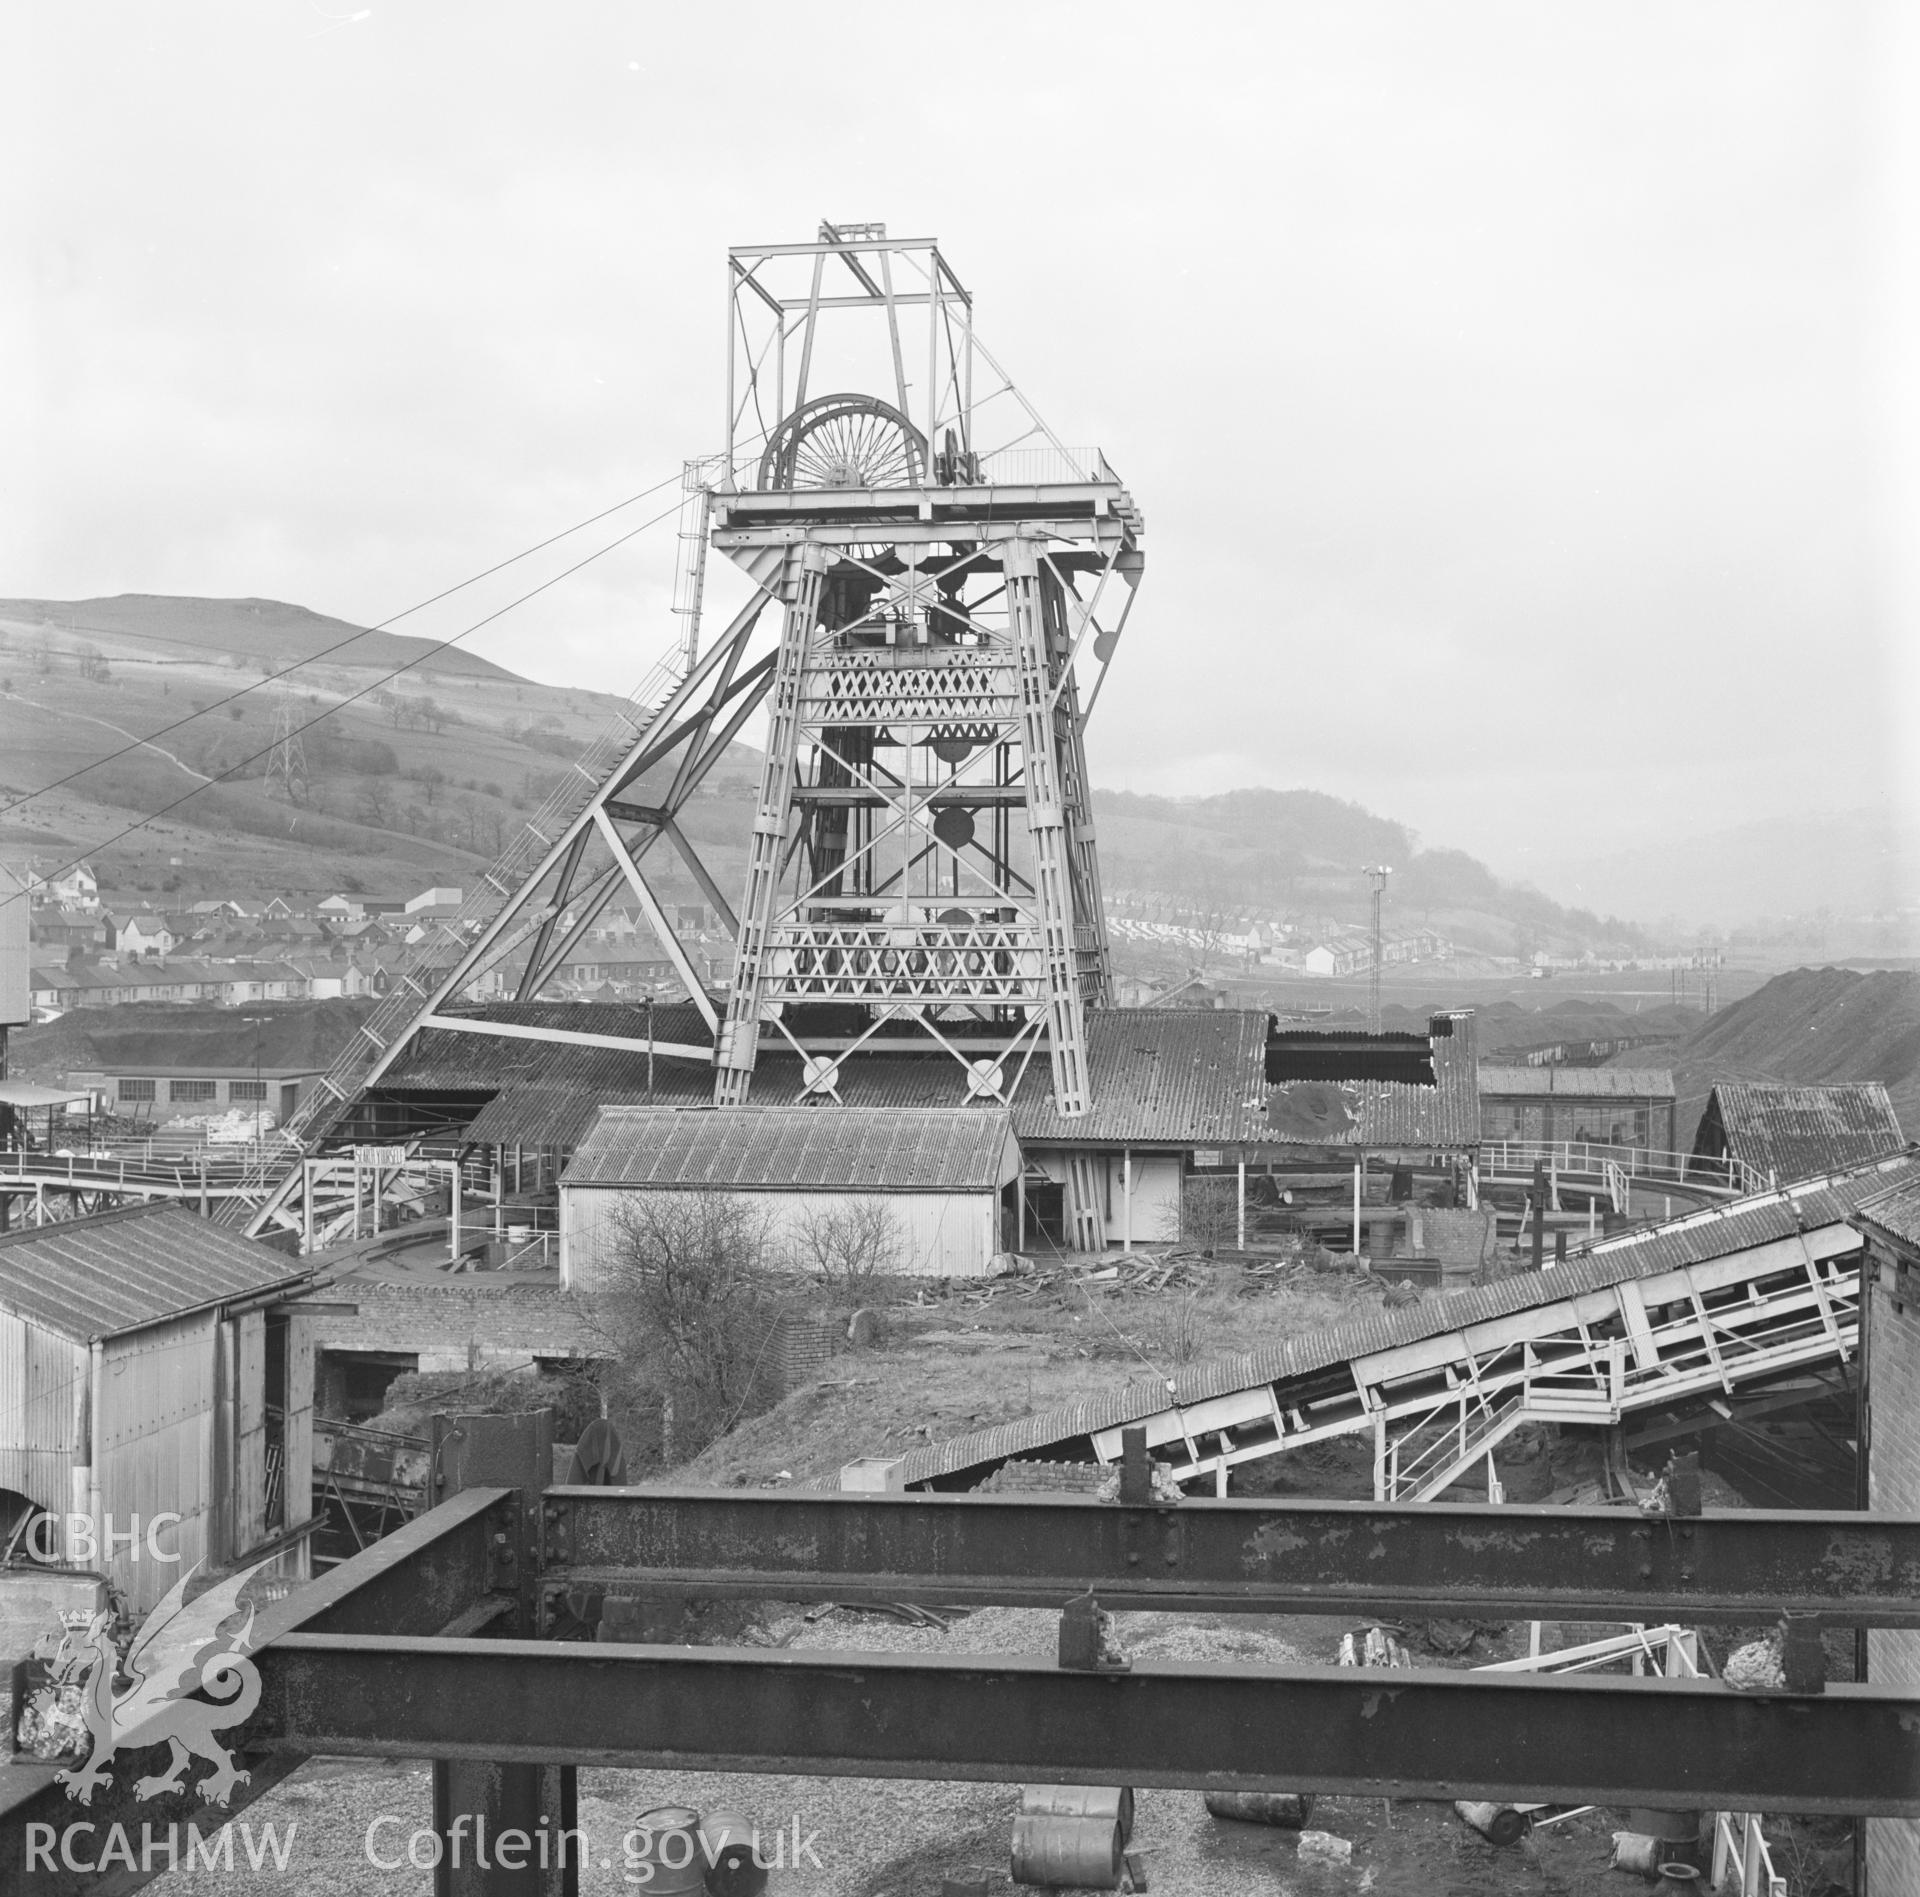 Digital copy of an acetate negative showing downcast shaft at Taff Colliery, from the John Cornwell Collection.